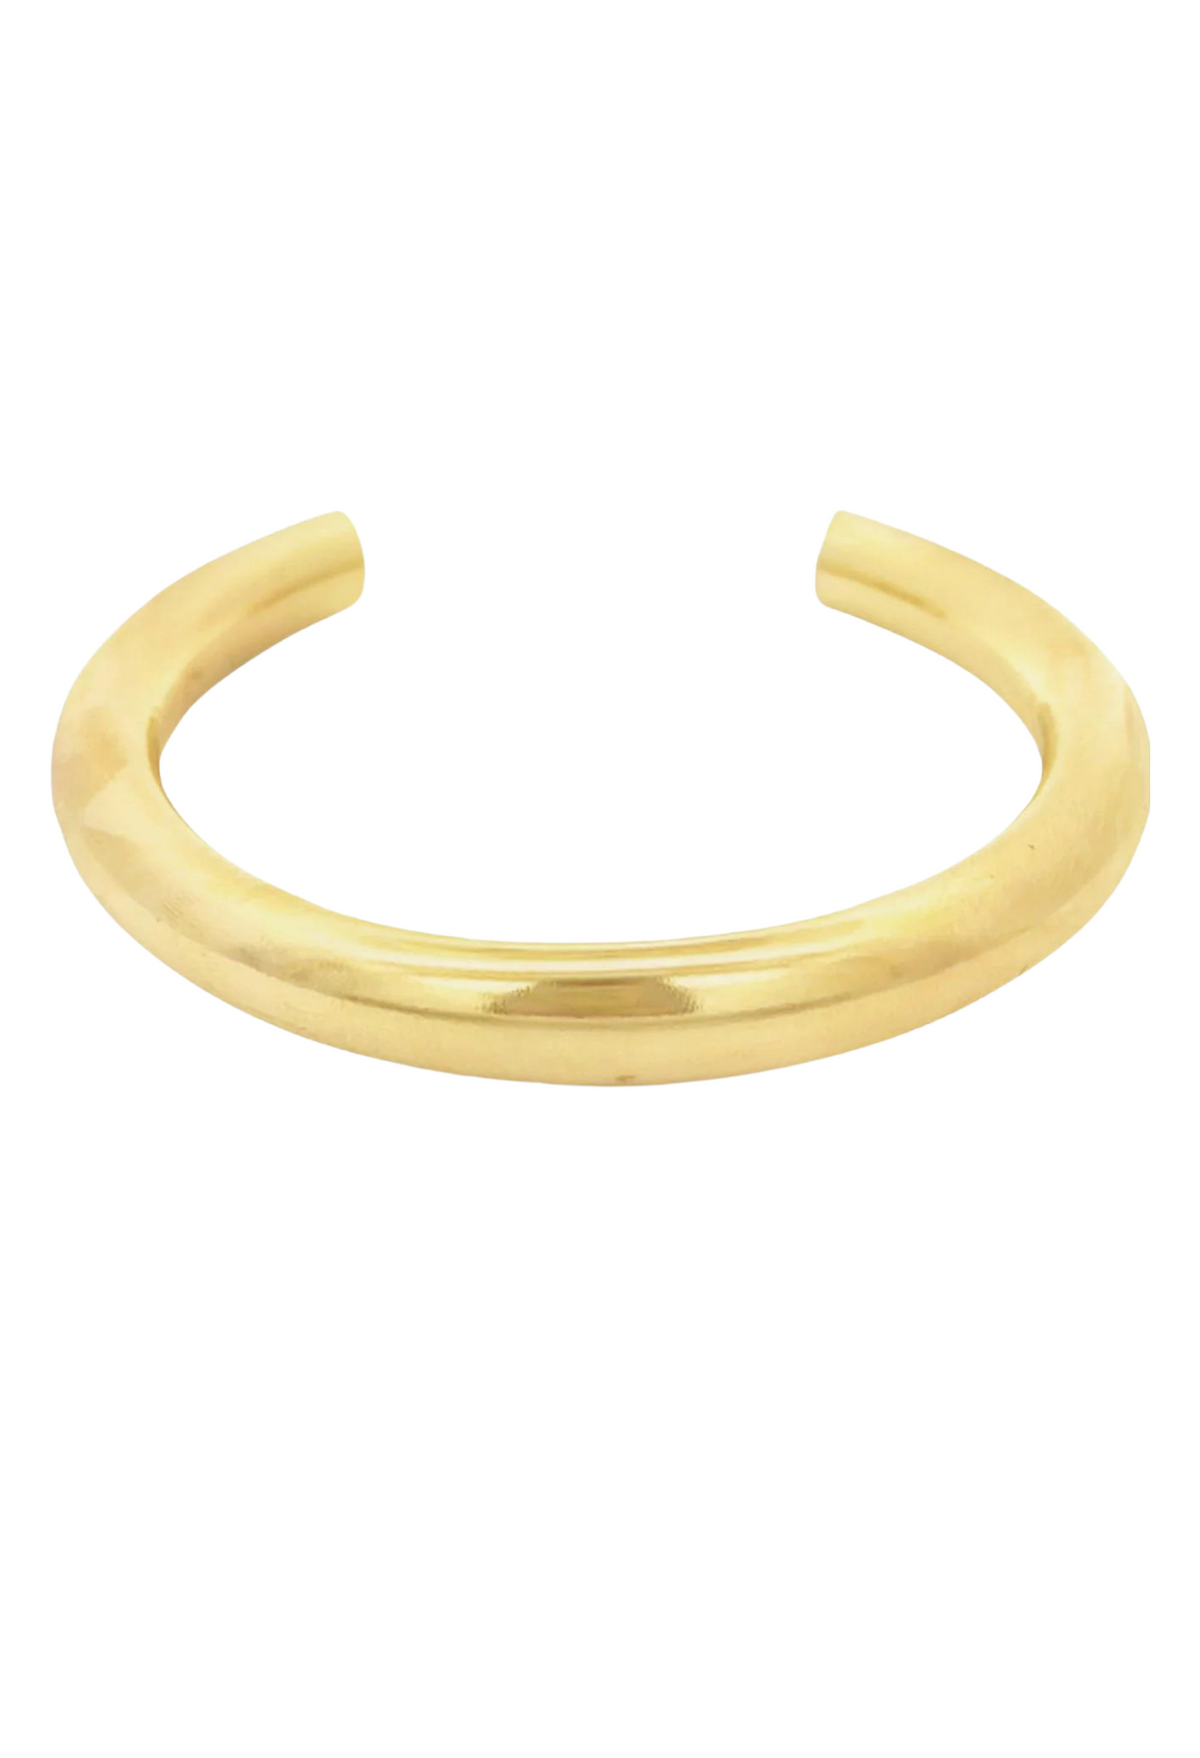 Chunky Bold Solid Gold Bangle, 8mm thick, crafted from 18k gold-filled material, tarnish-resistant and hypoallergenic, perfect for stacking or solo wear.